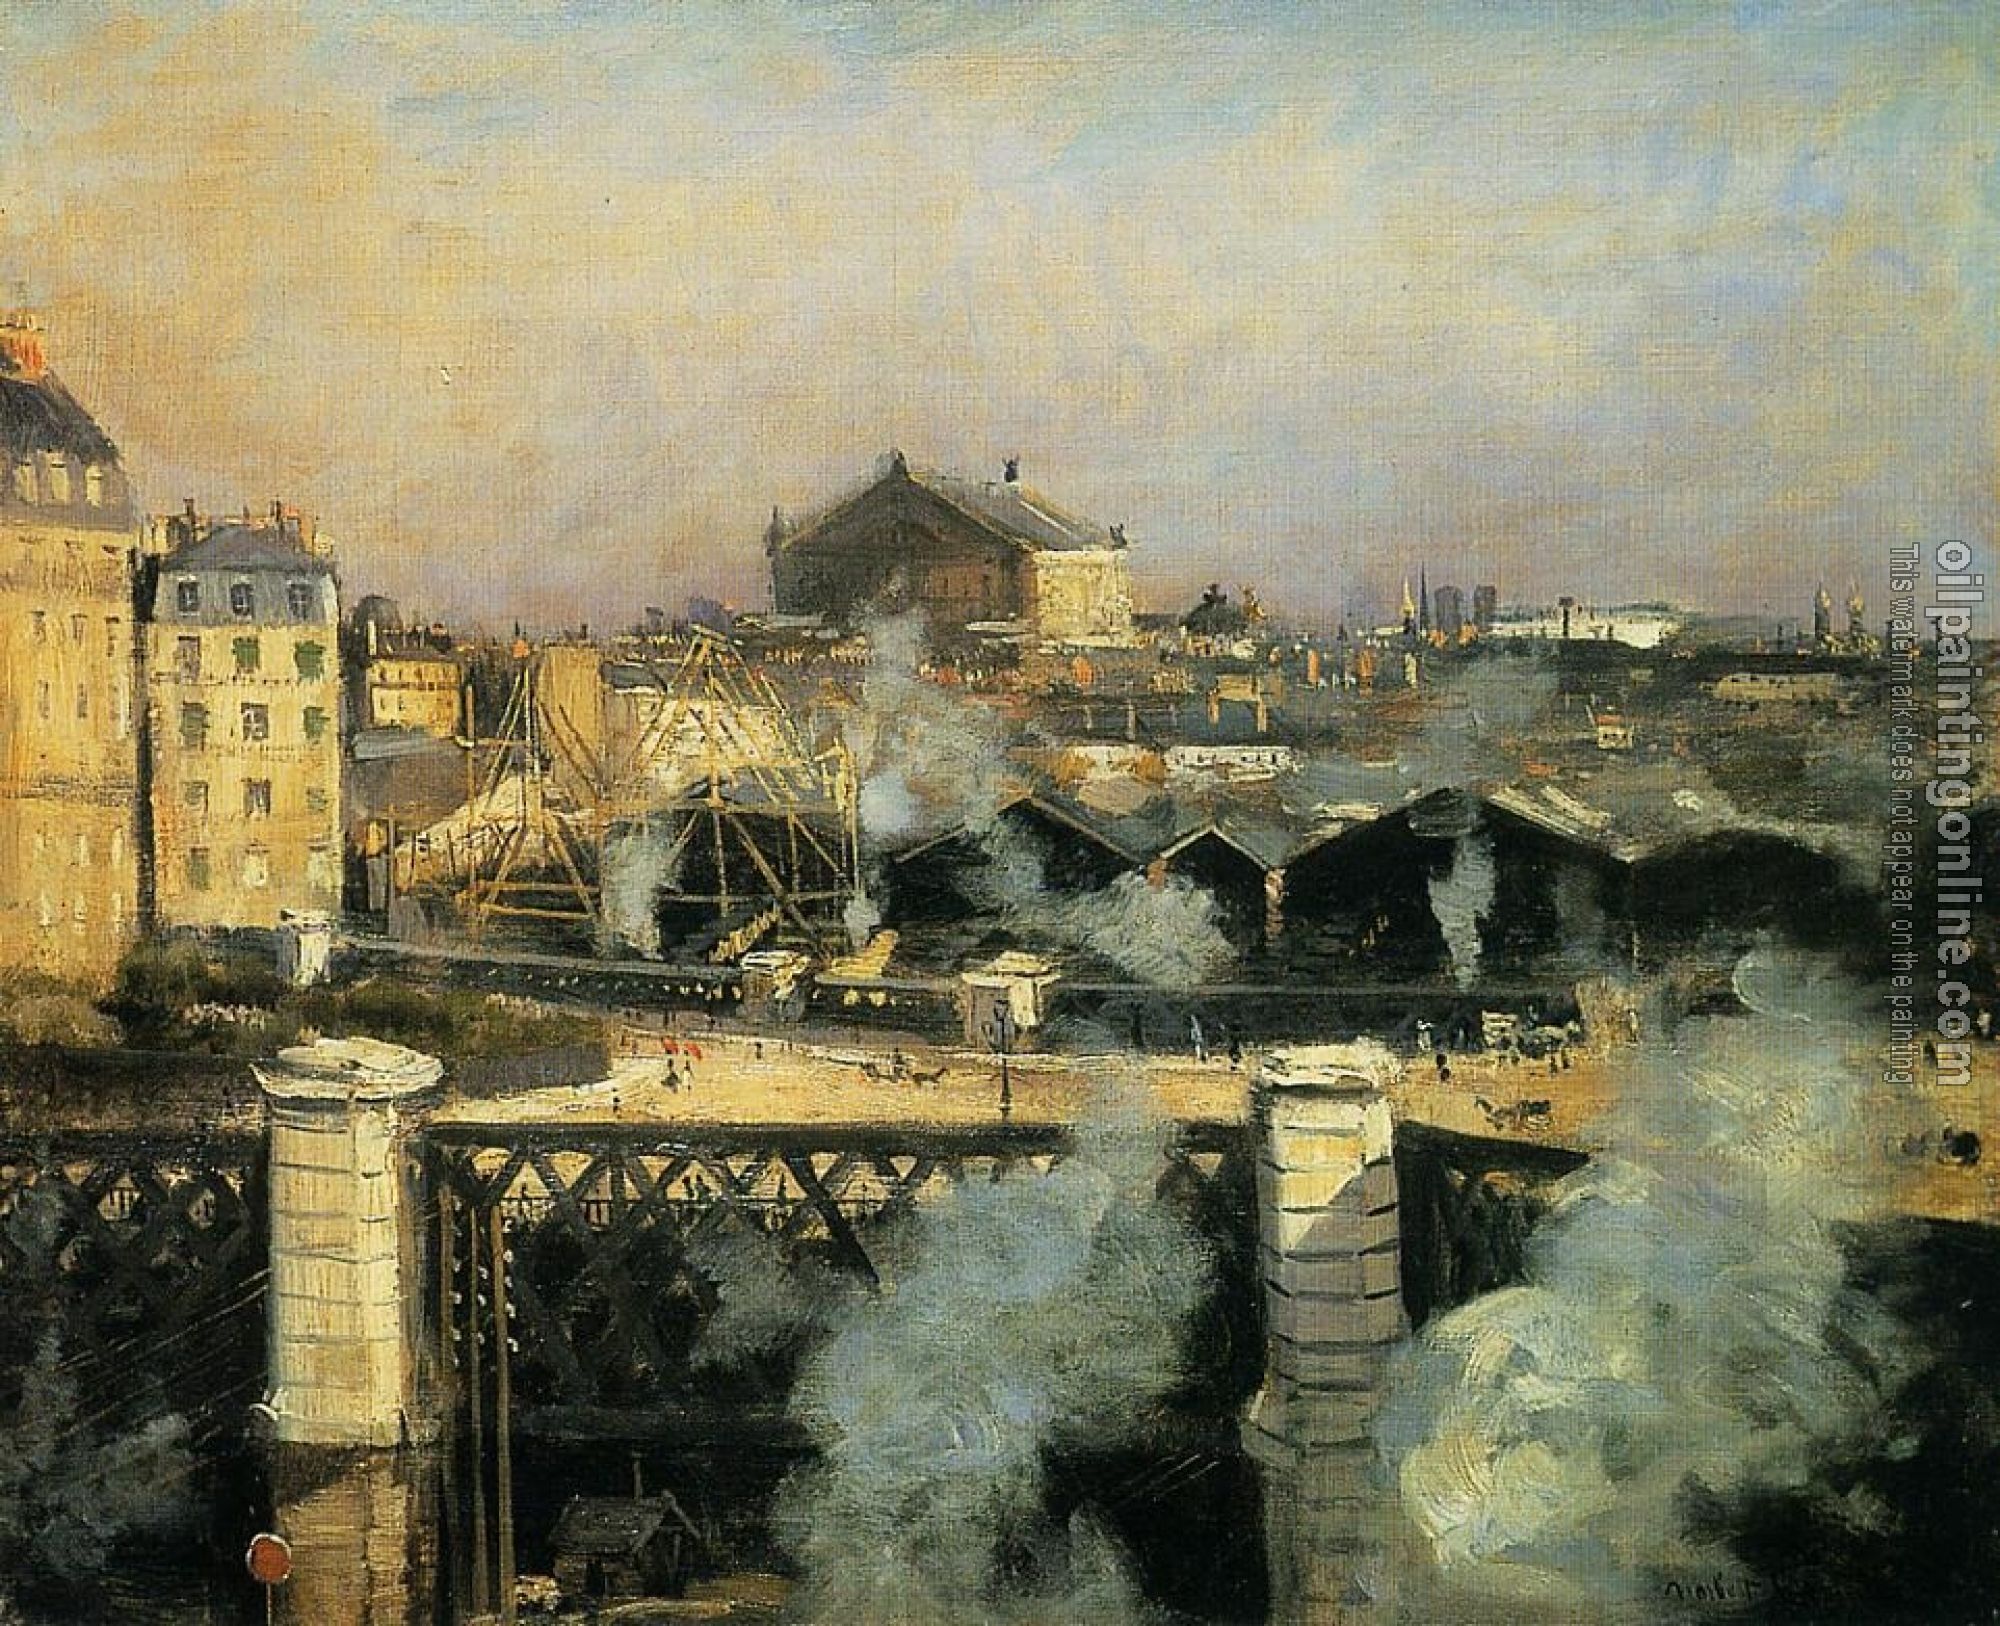 Goeneutte, Norbert - The Pont de l'Europe and the Gare Saint-Lazare with Scaffold